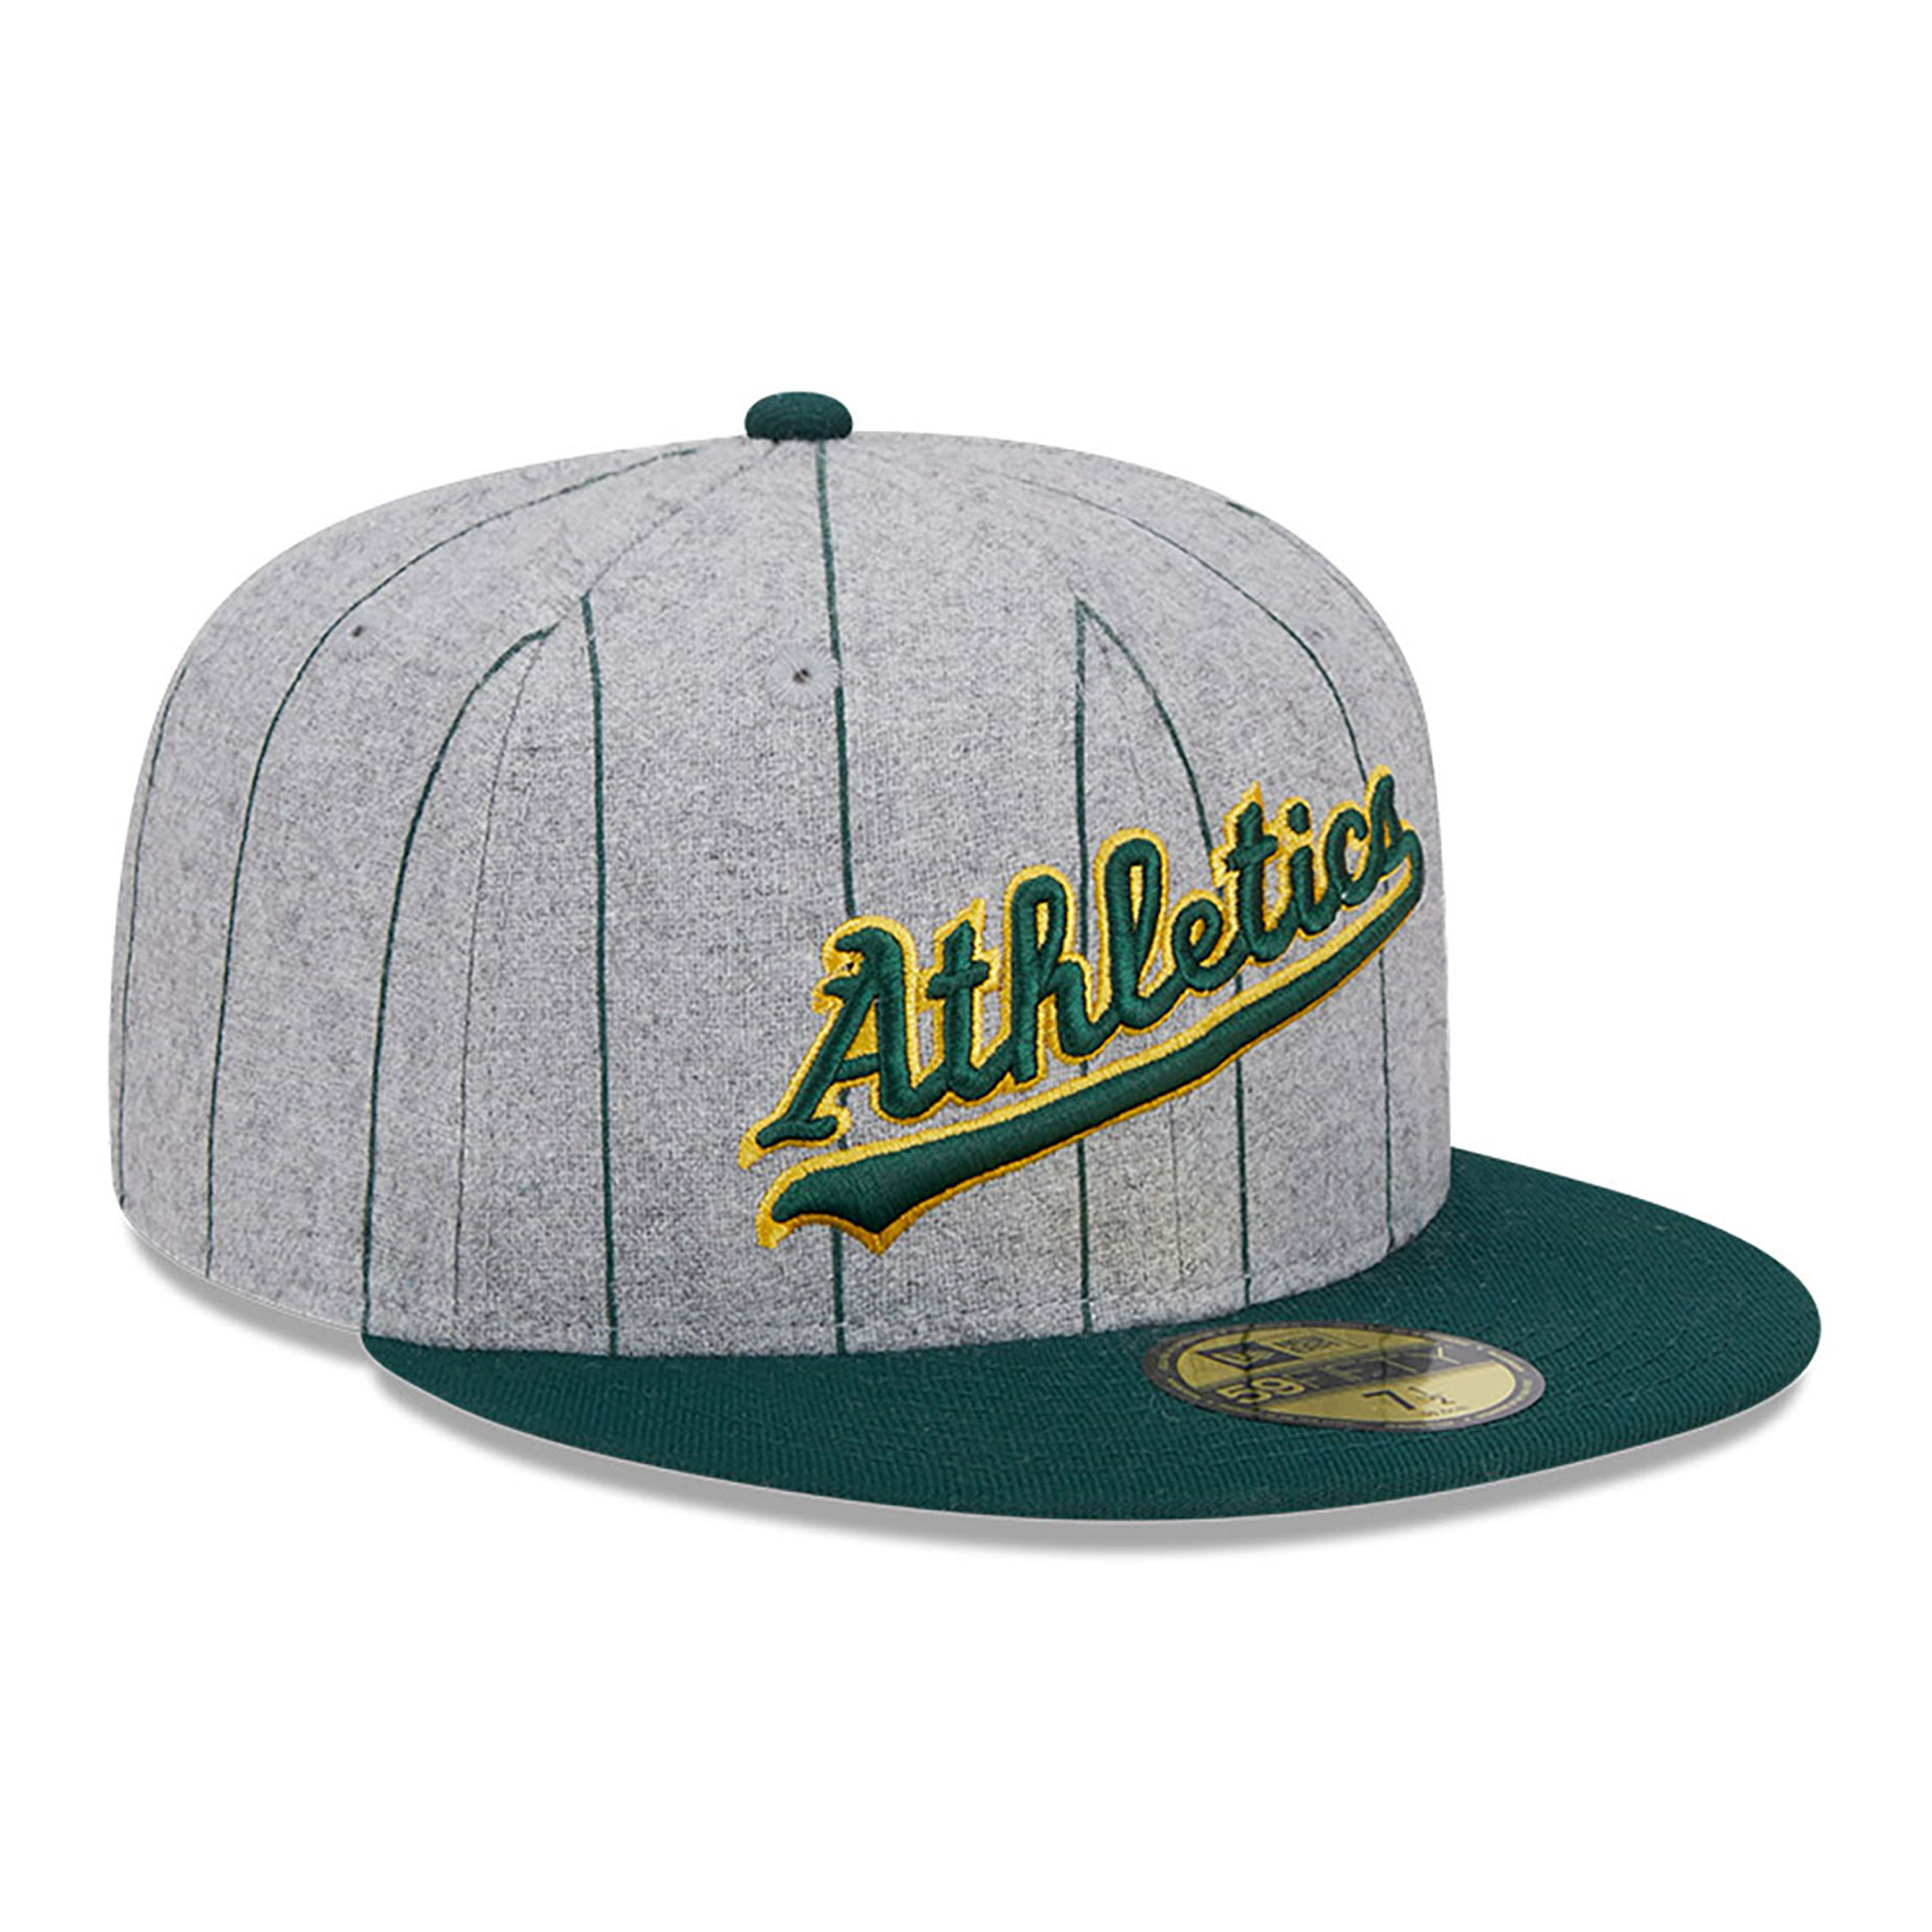 Oakland Athletics Heather Pinstripe Grey 59FIFTY Fitted Cap